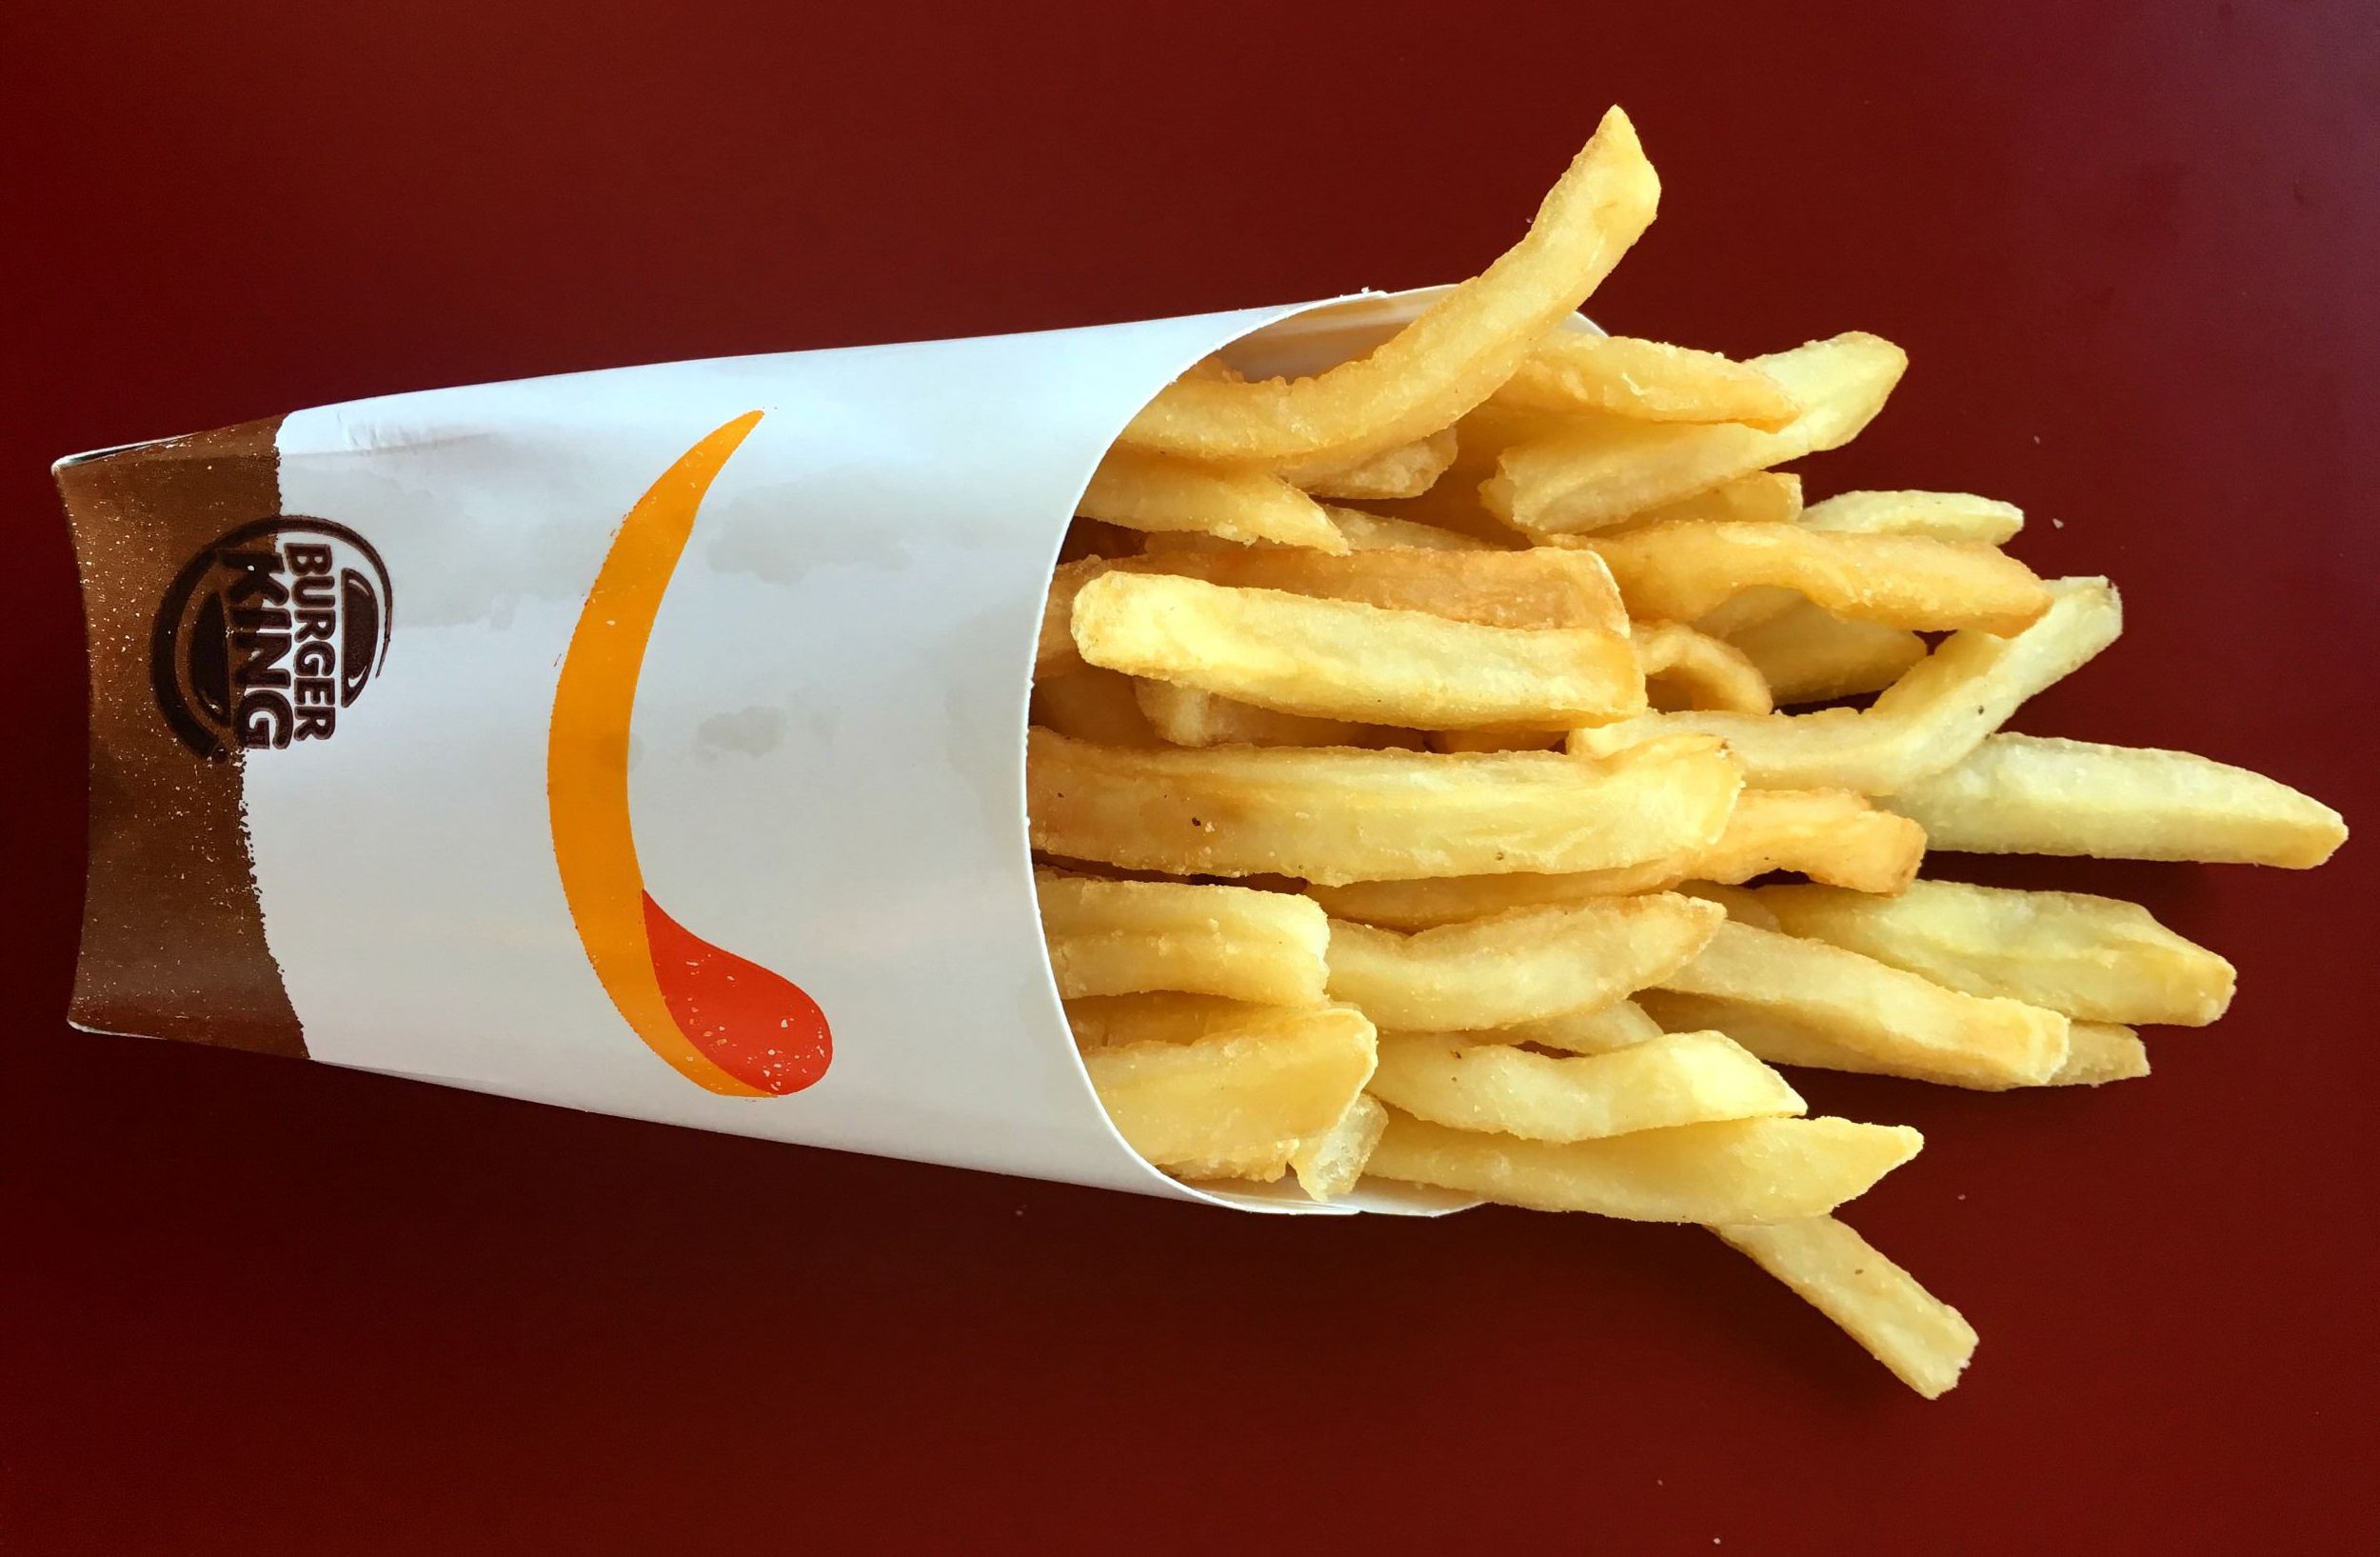 Get Free Fries with a $1+ In-app or Online Order at Burger King this Weekend Through to Monday